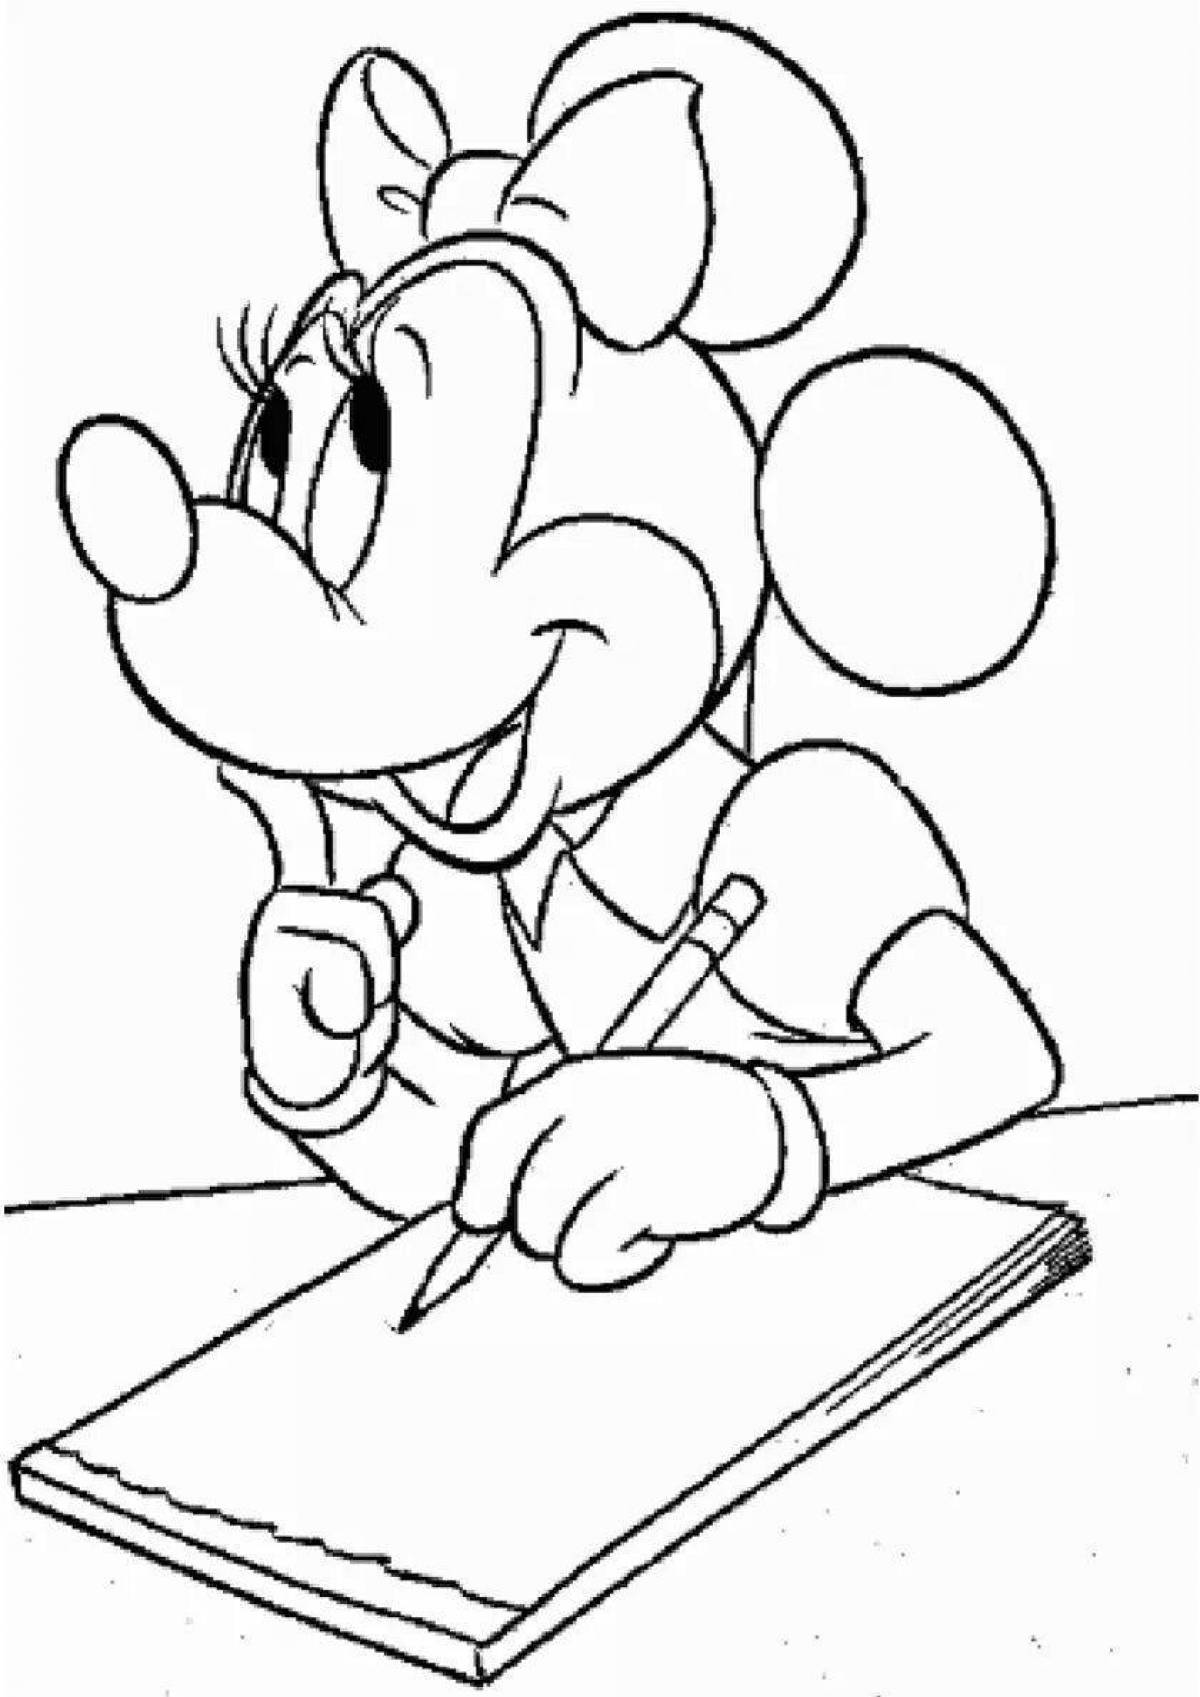 Coloring book amazing cartoon characters